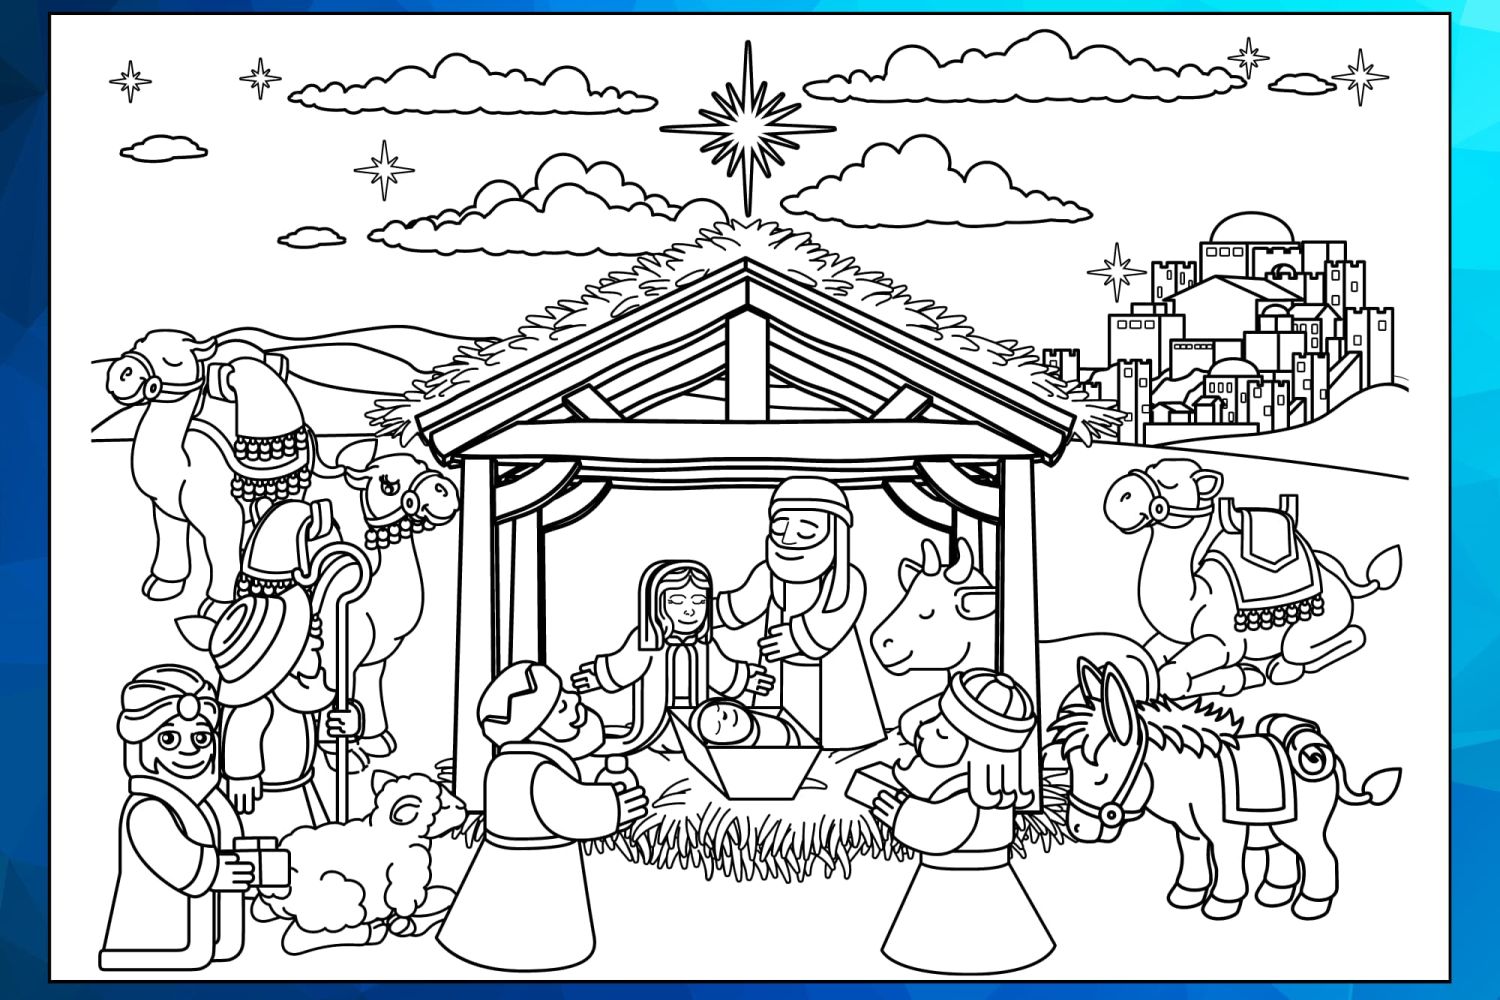 Nativity%20Scene%20Christmas%20Coloring%20Pages%20Worksheet%201-175b3fa4 God the Father